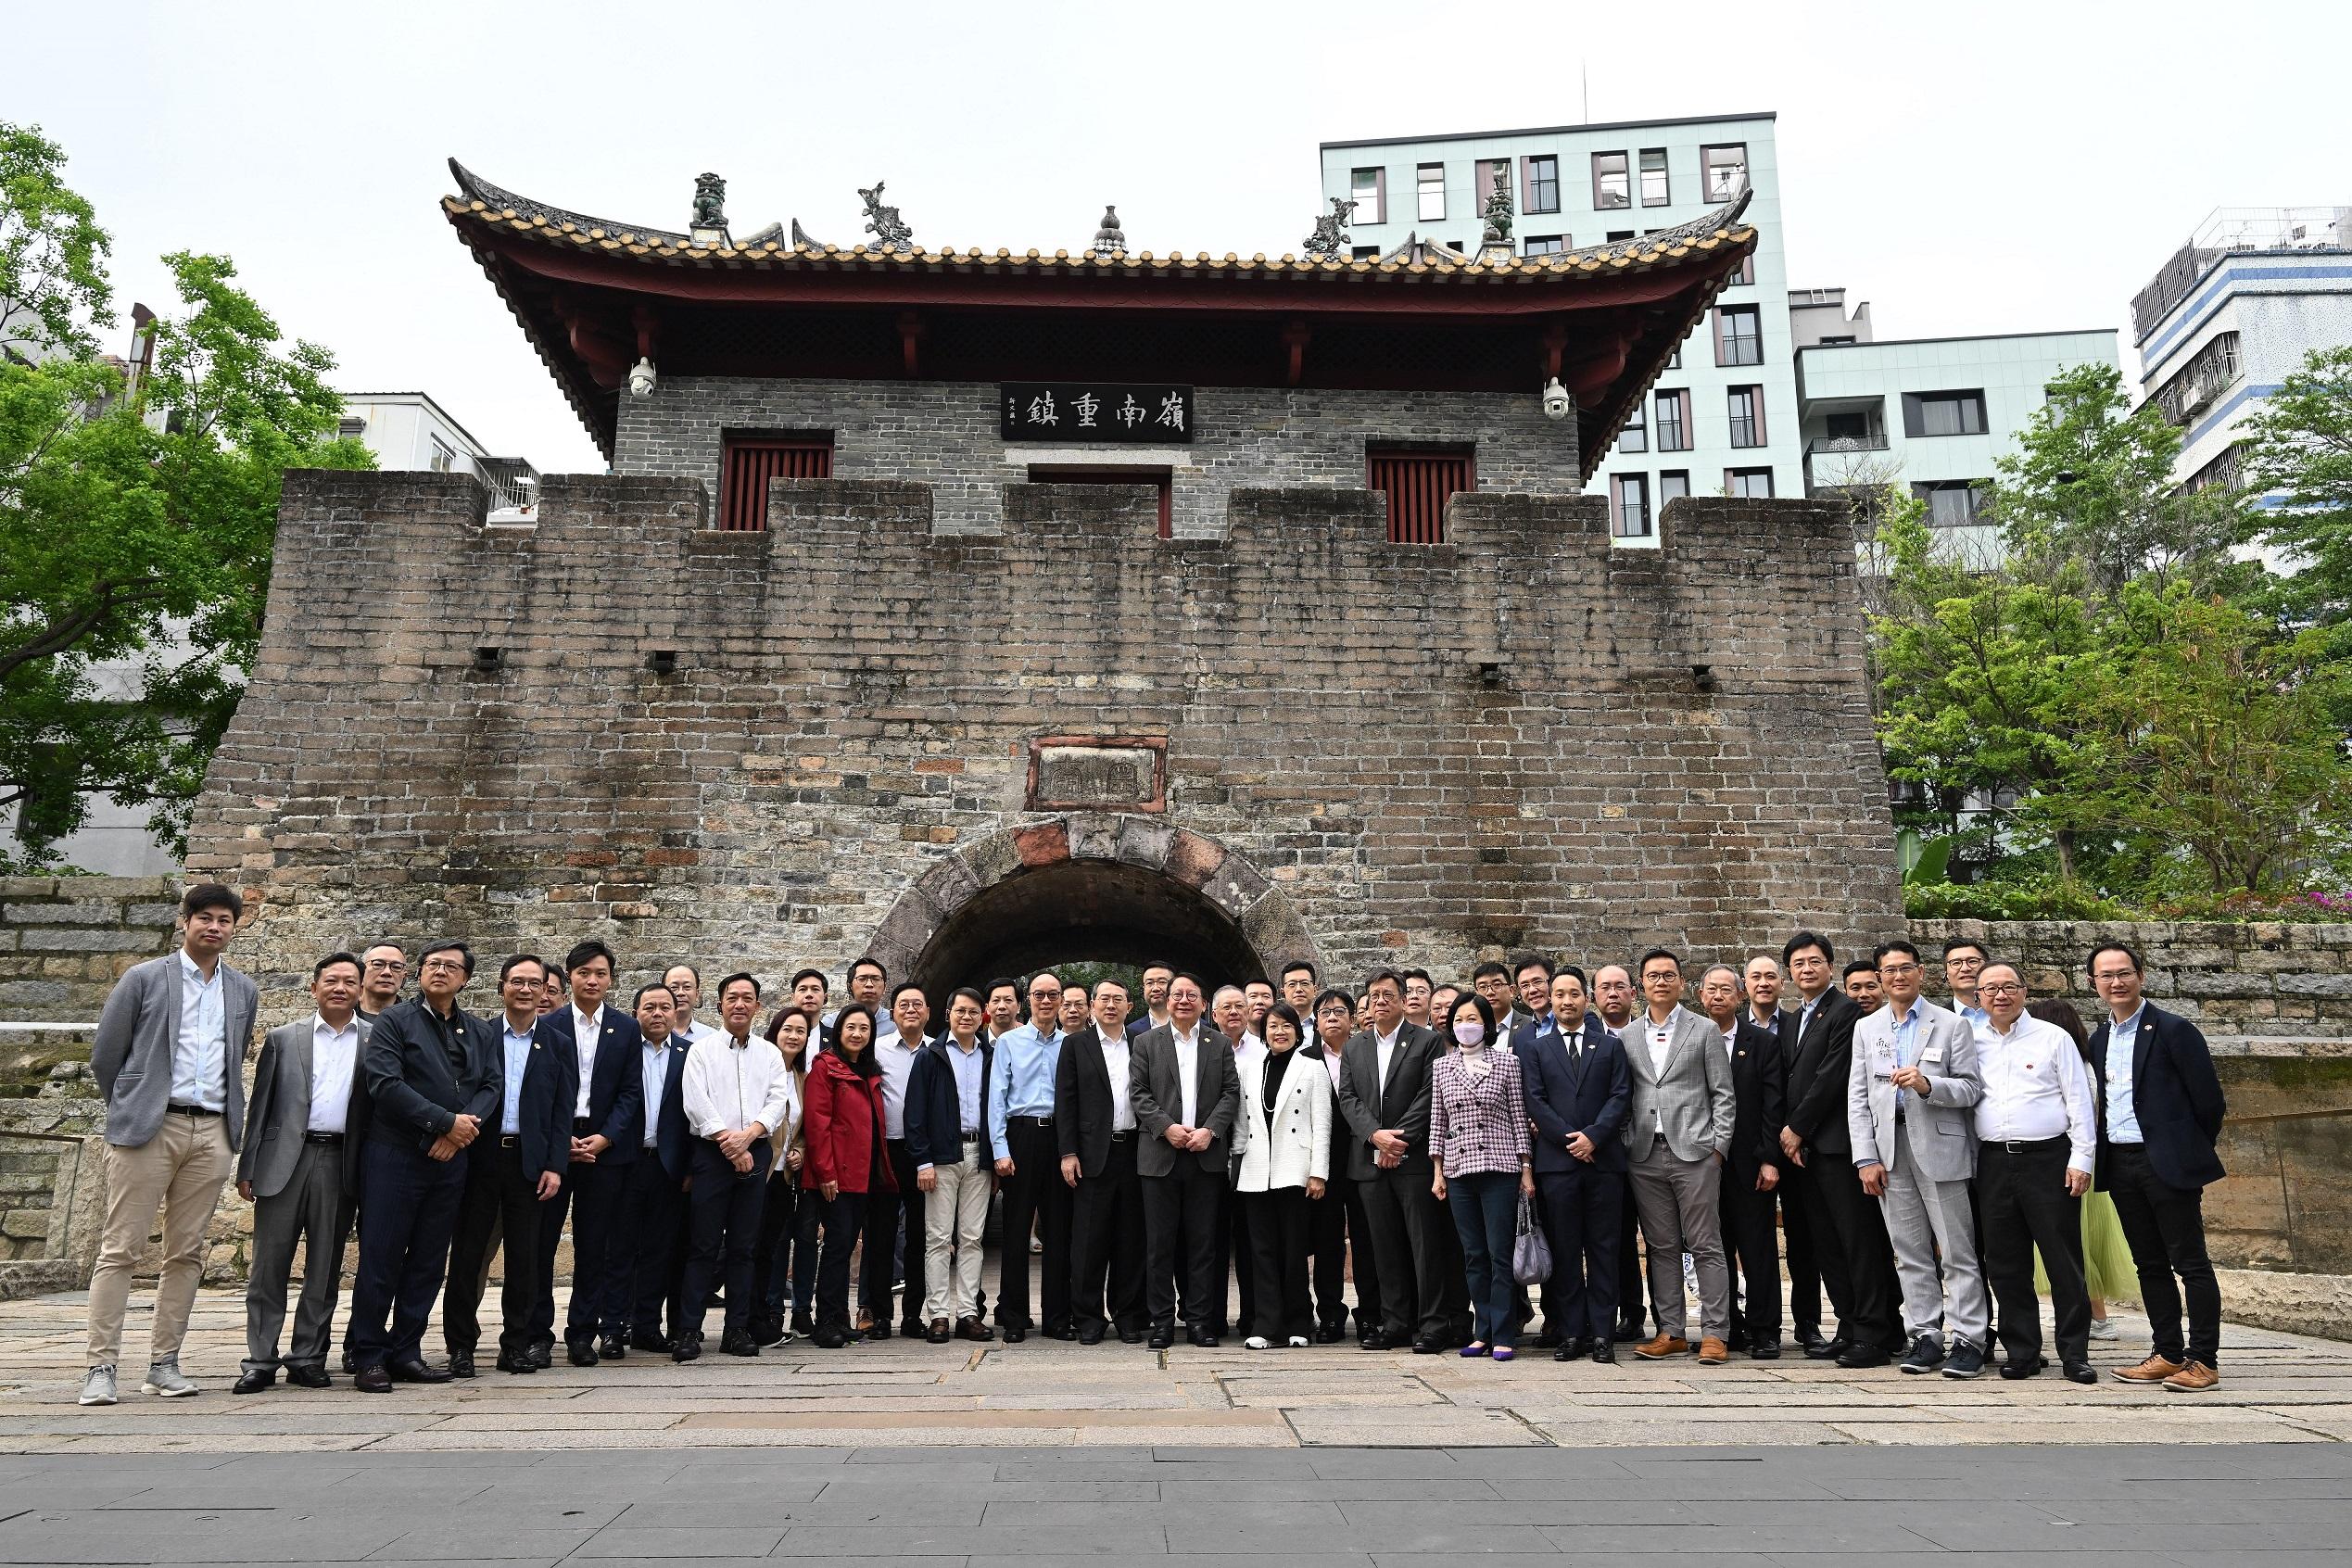 The delegation of the Hong Kong Special Administrative Region Government and the Legislative Council (LegCo) led by the Chief Executive, Mr John Lee, conducted their second-day visit in the Guangdong-Hong Kong-Macao Greater Bay Area today (April 22). Photo shows the Chief Secretary for Administration, Mr Chan Kwok-ki (first row, sixth right); Member of the Standing Committee of the Shenzhen Municipal Committee of the Communist Party of China and the Head of the United Front Work Department of the Shenzhen Municipal Committee of the Communist Party of China, Mr Wang Qiang (first row, seventh right); the Secretary for Commerce and Economic Development, Mr Algernon Yau (first  row, fourth right); the Secretary for Innovation, Technology and Industry, Professor Sun Dong (second row, seventh right), and LegCo Members visiting the Nantou Ancient Town.